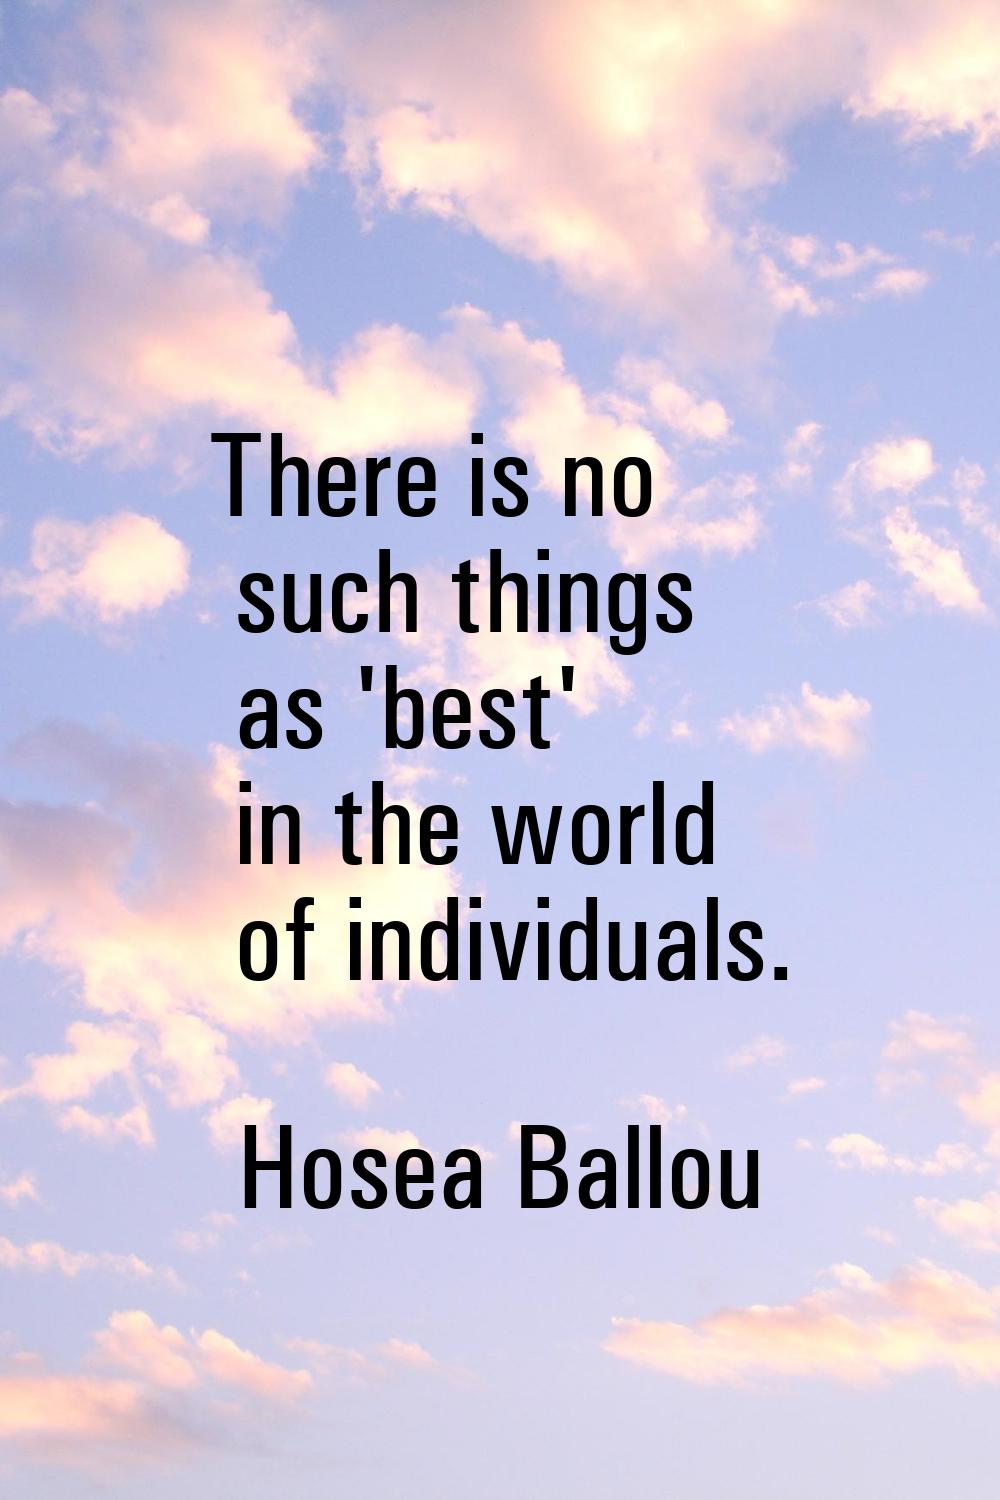 There is no such things as 'best' in the world of individuals.